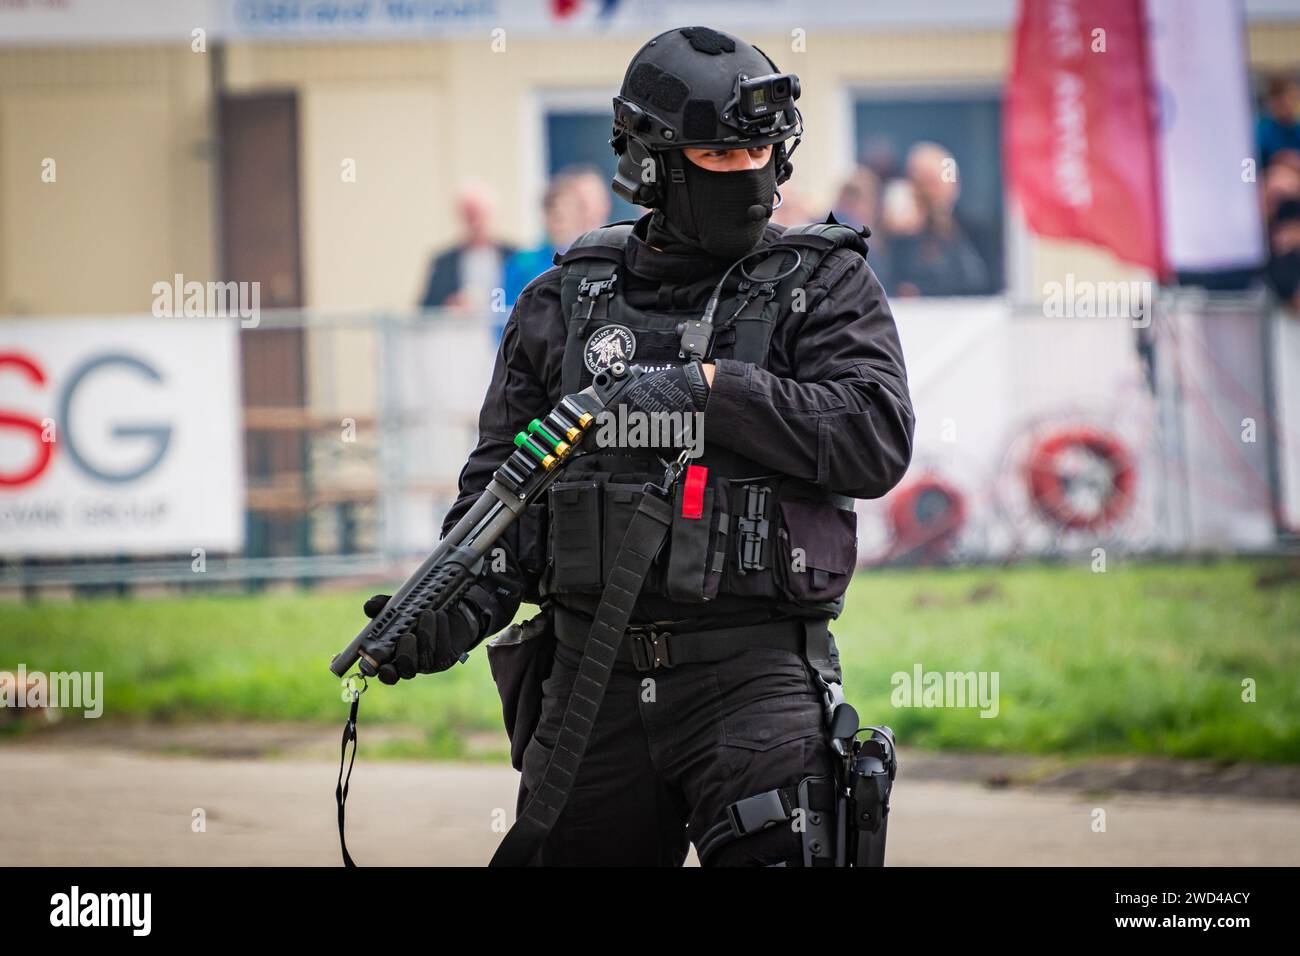 Man with shotgun. Tactical SWAT officer from the Czech border force standing in full body armour holding a shotgun at NATO days airshow. Stock Photo